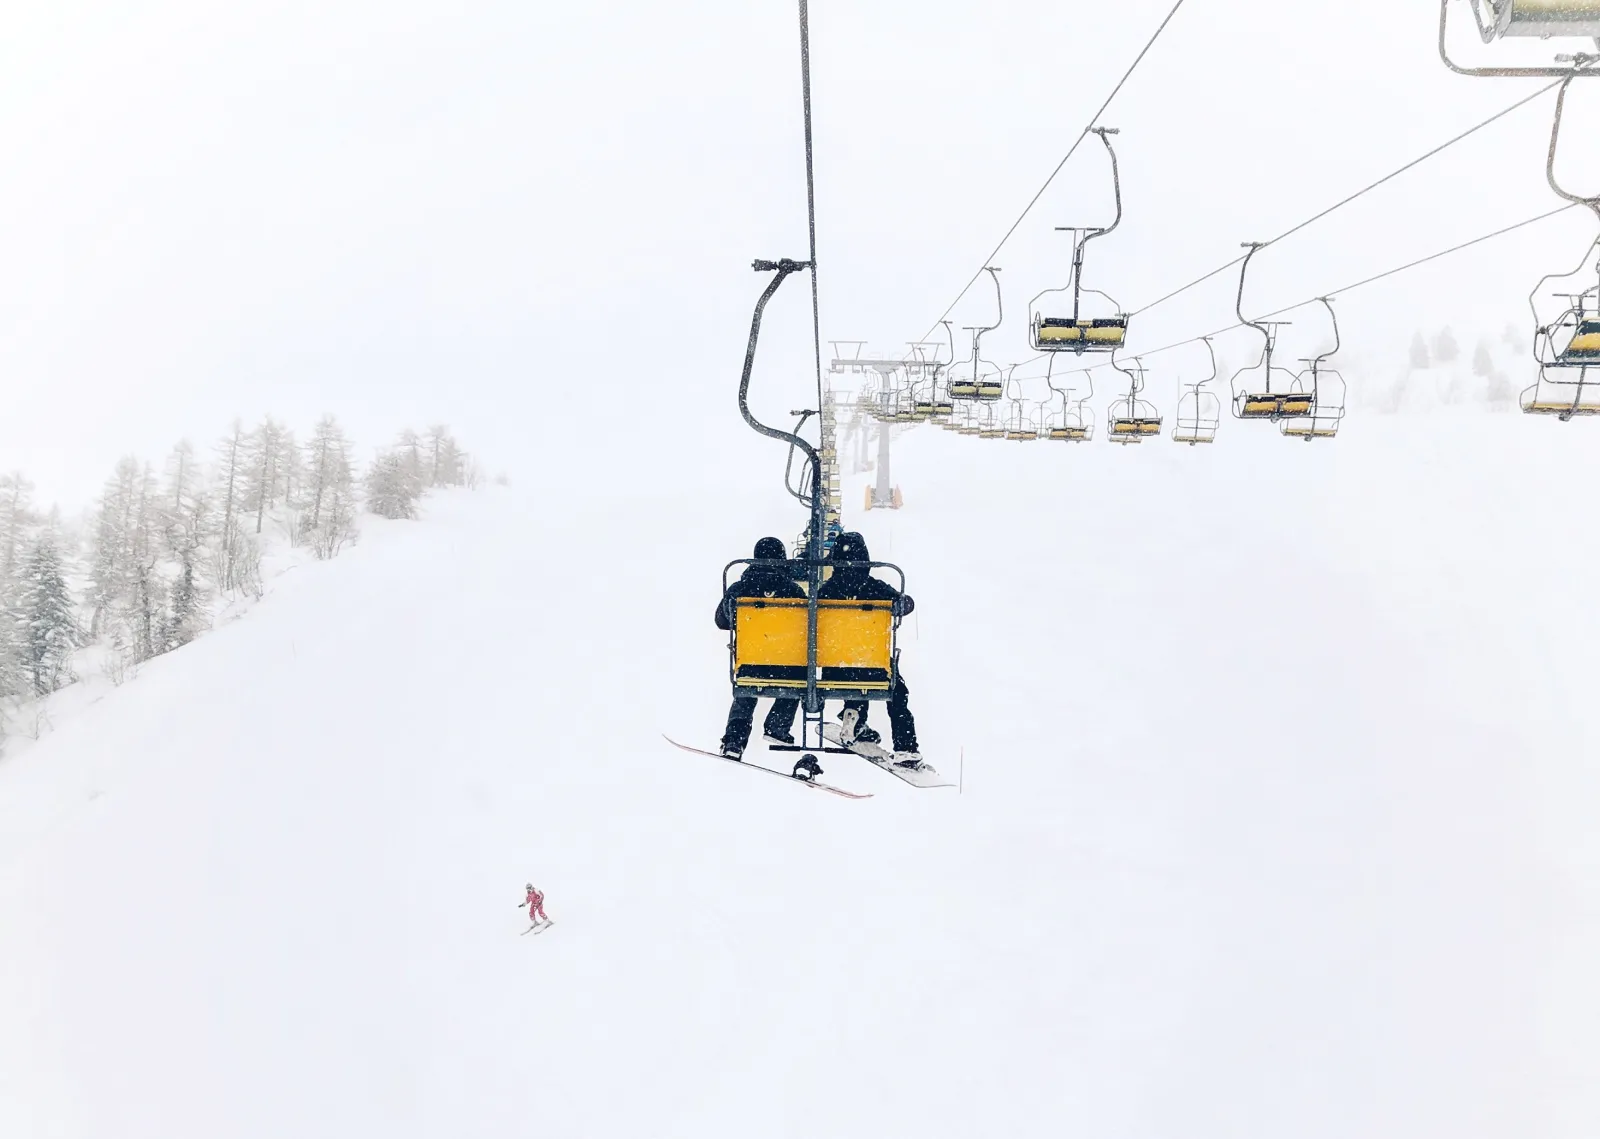 Two people going up a chairlift